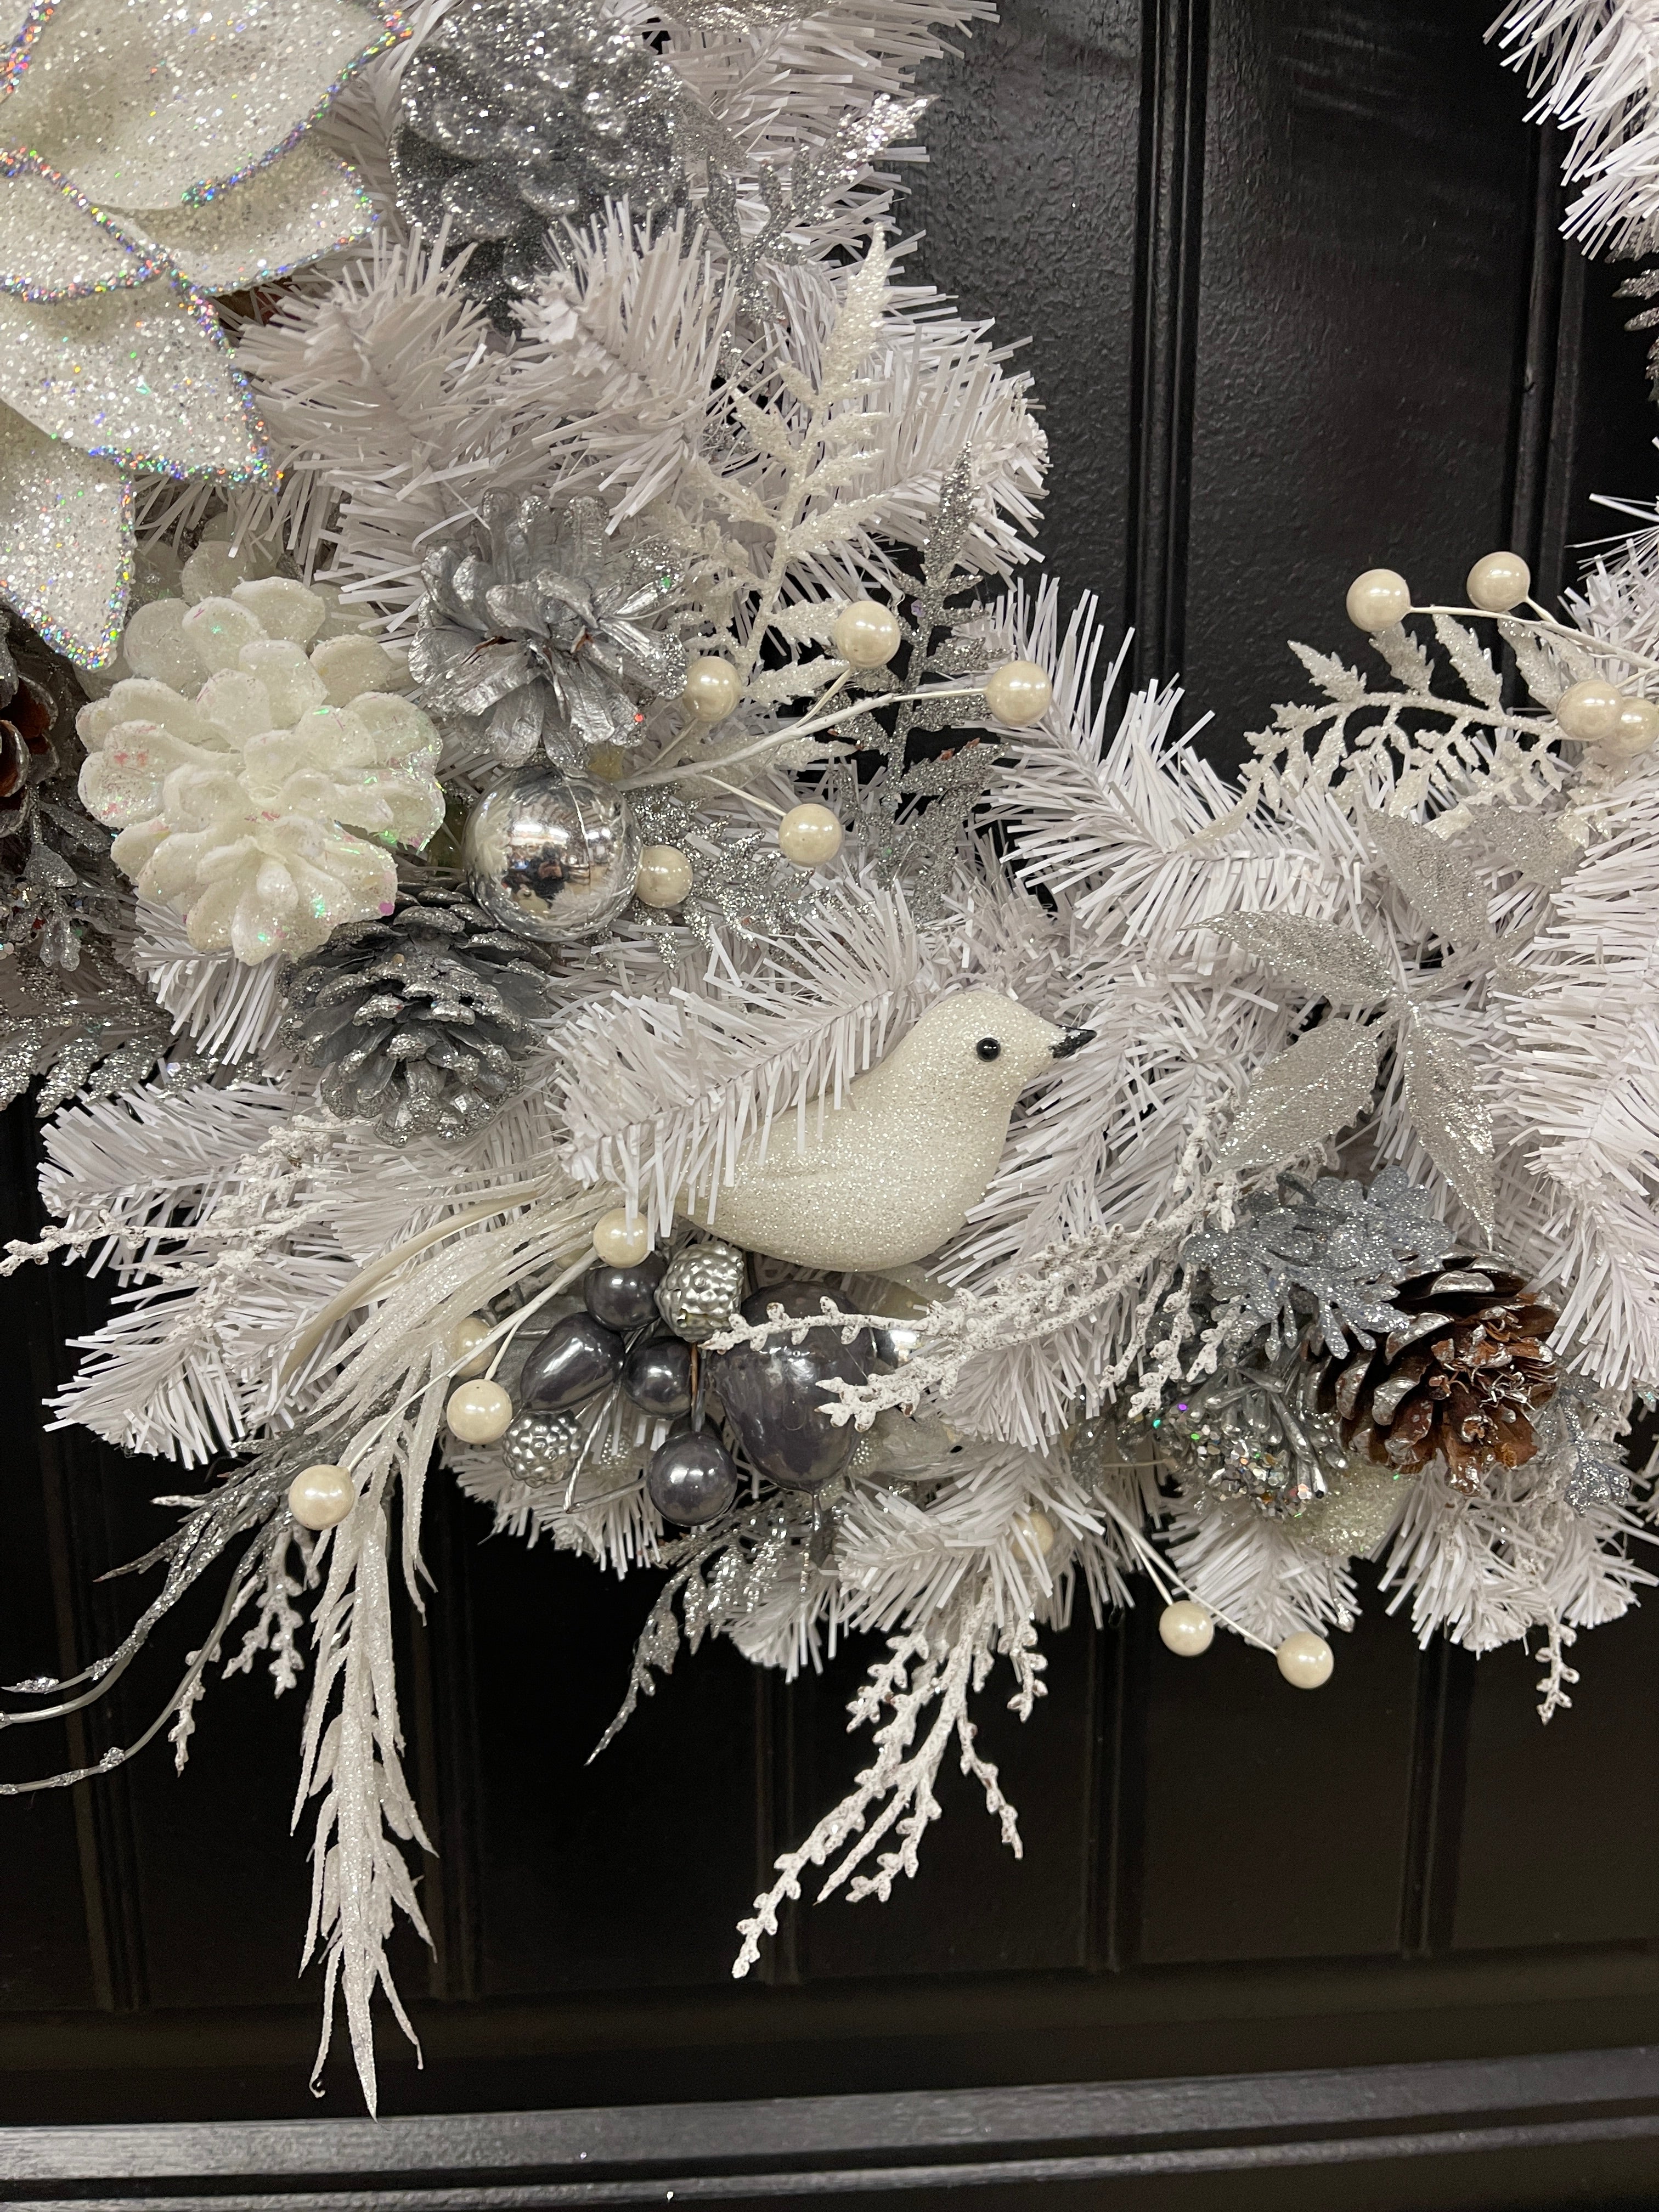 Close Up Detail of White Dove with Gray and White Berries on a White Evergreen with Frosted Pine Cones and White, Silver and Gray Christmas Balls